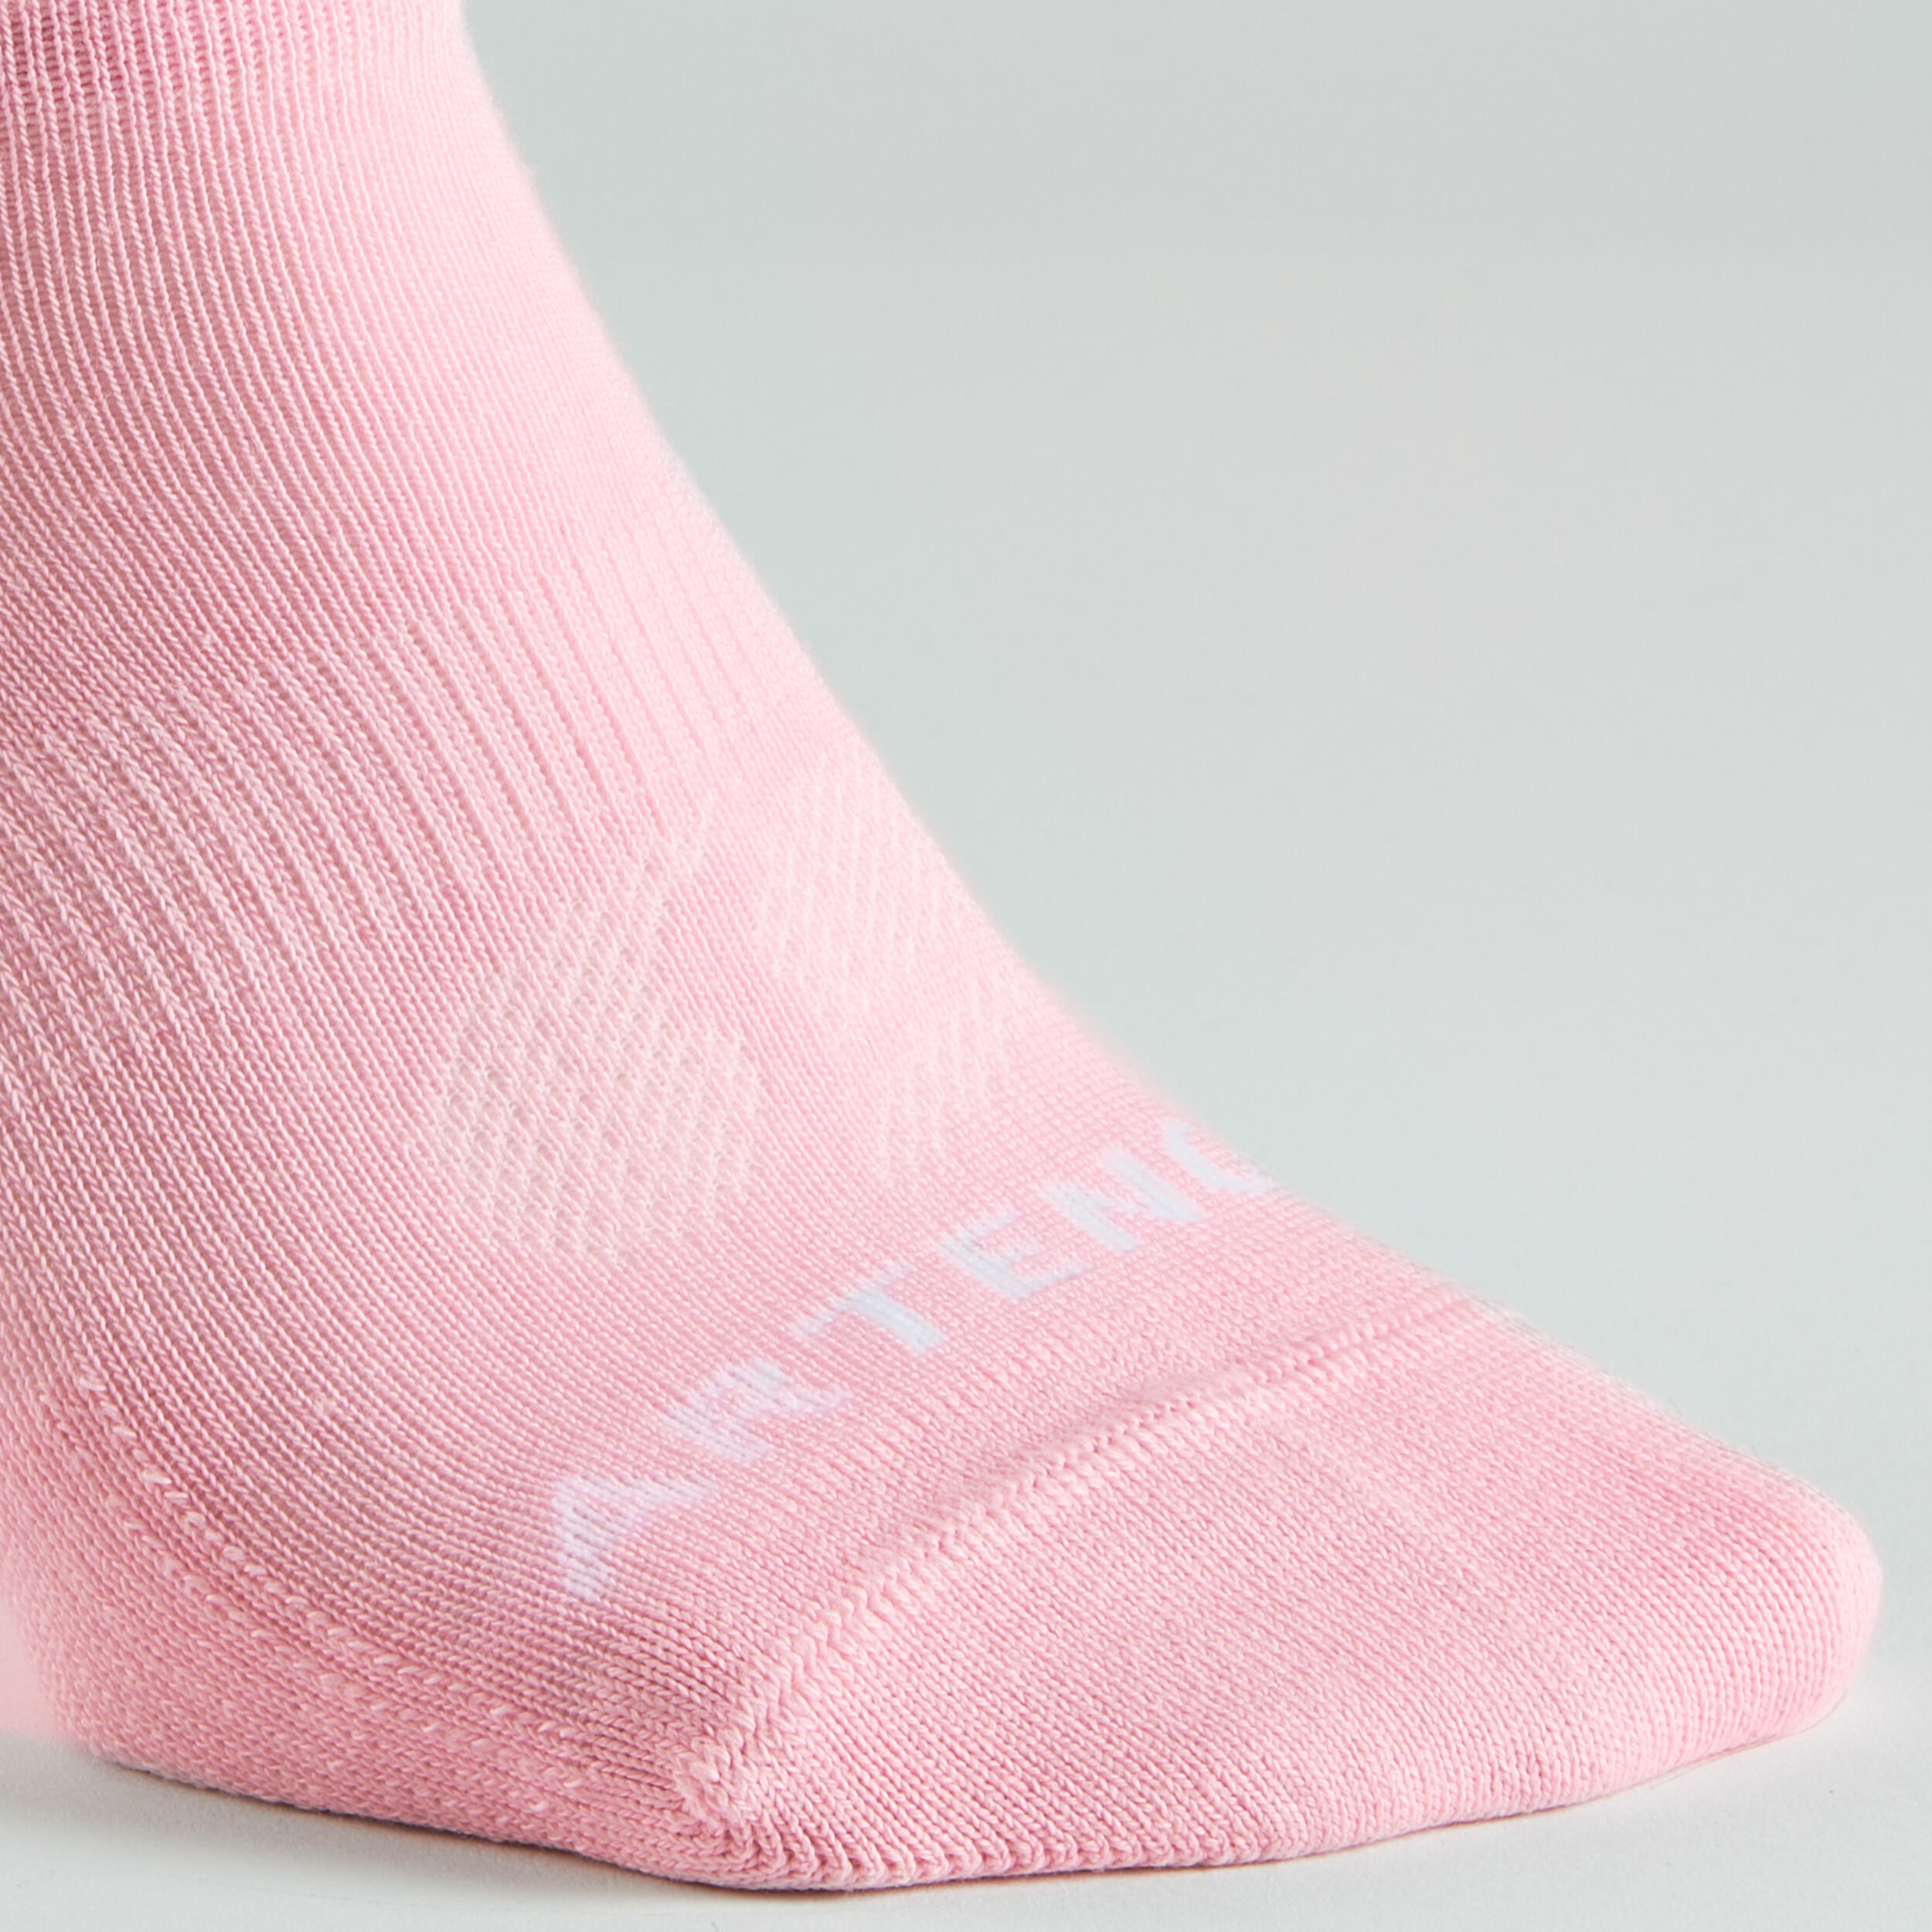 Low Sports Socks RS 160 Tri-Pack - Pink/White/China Blue 8/14